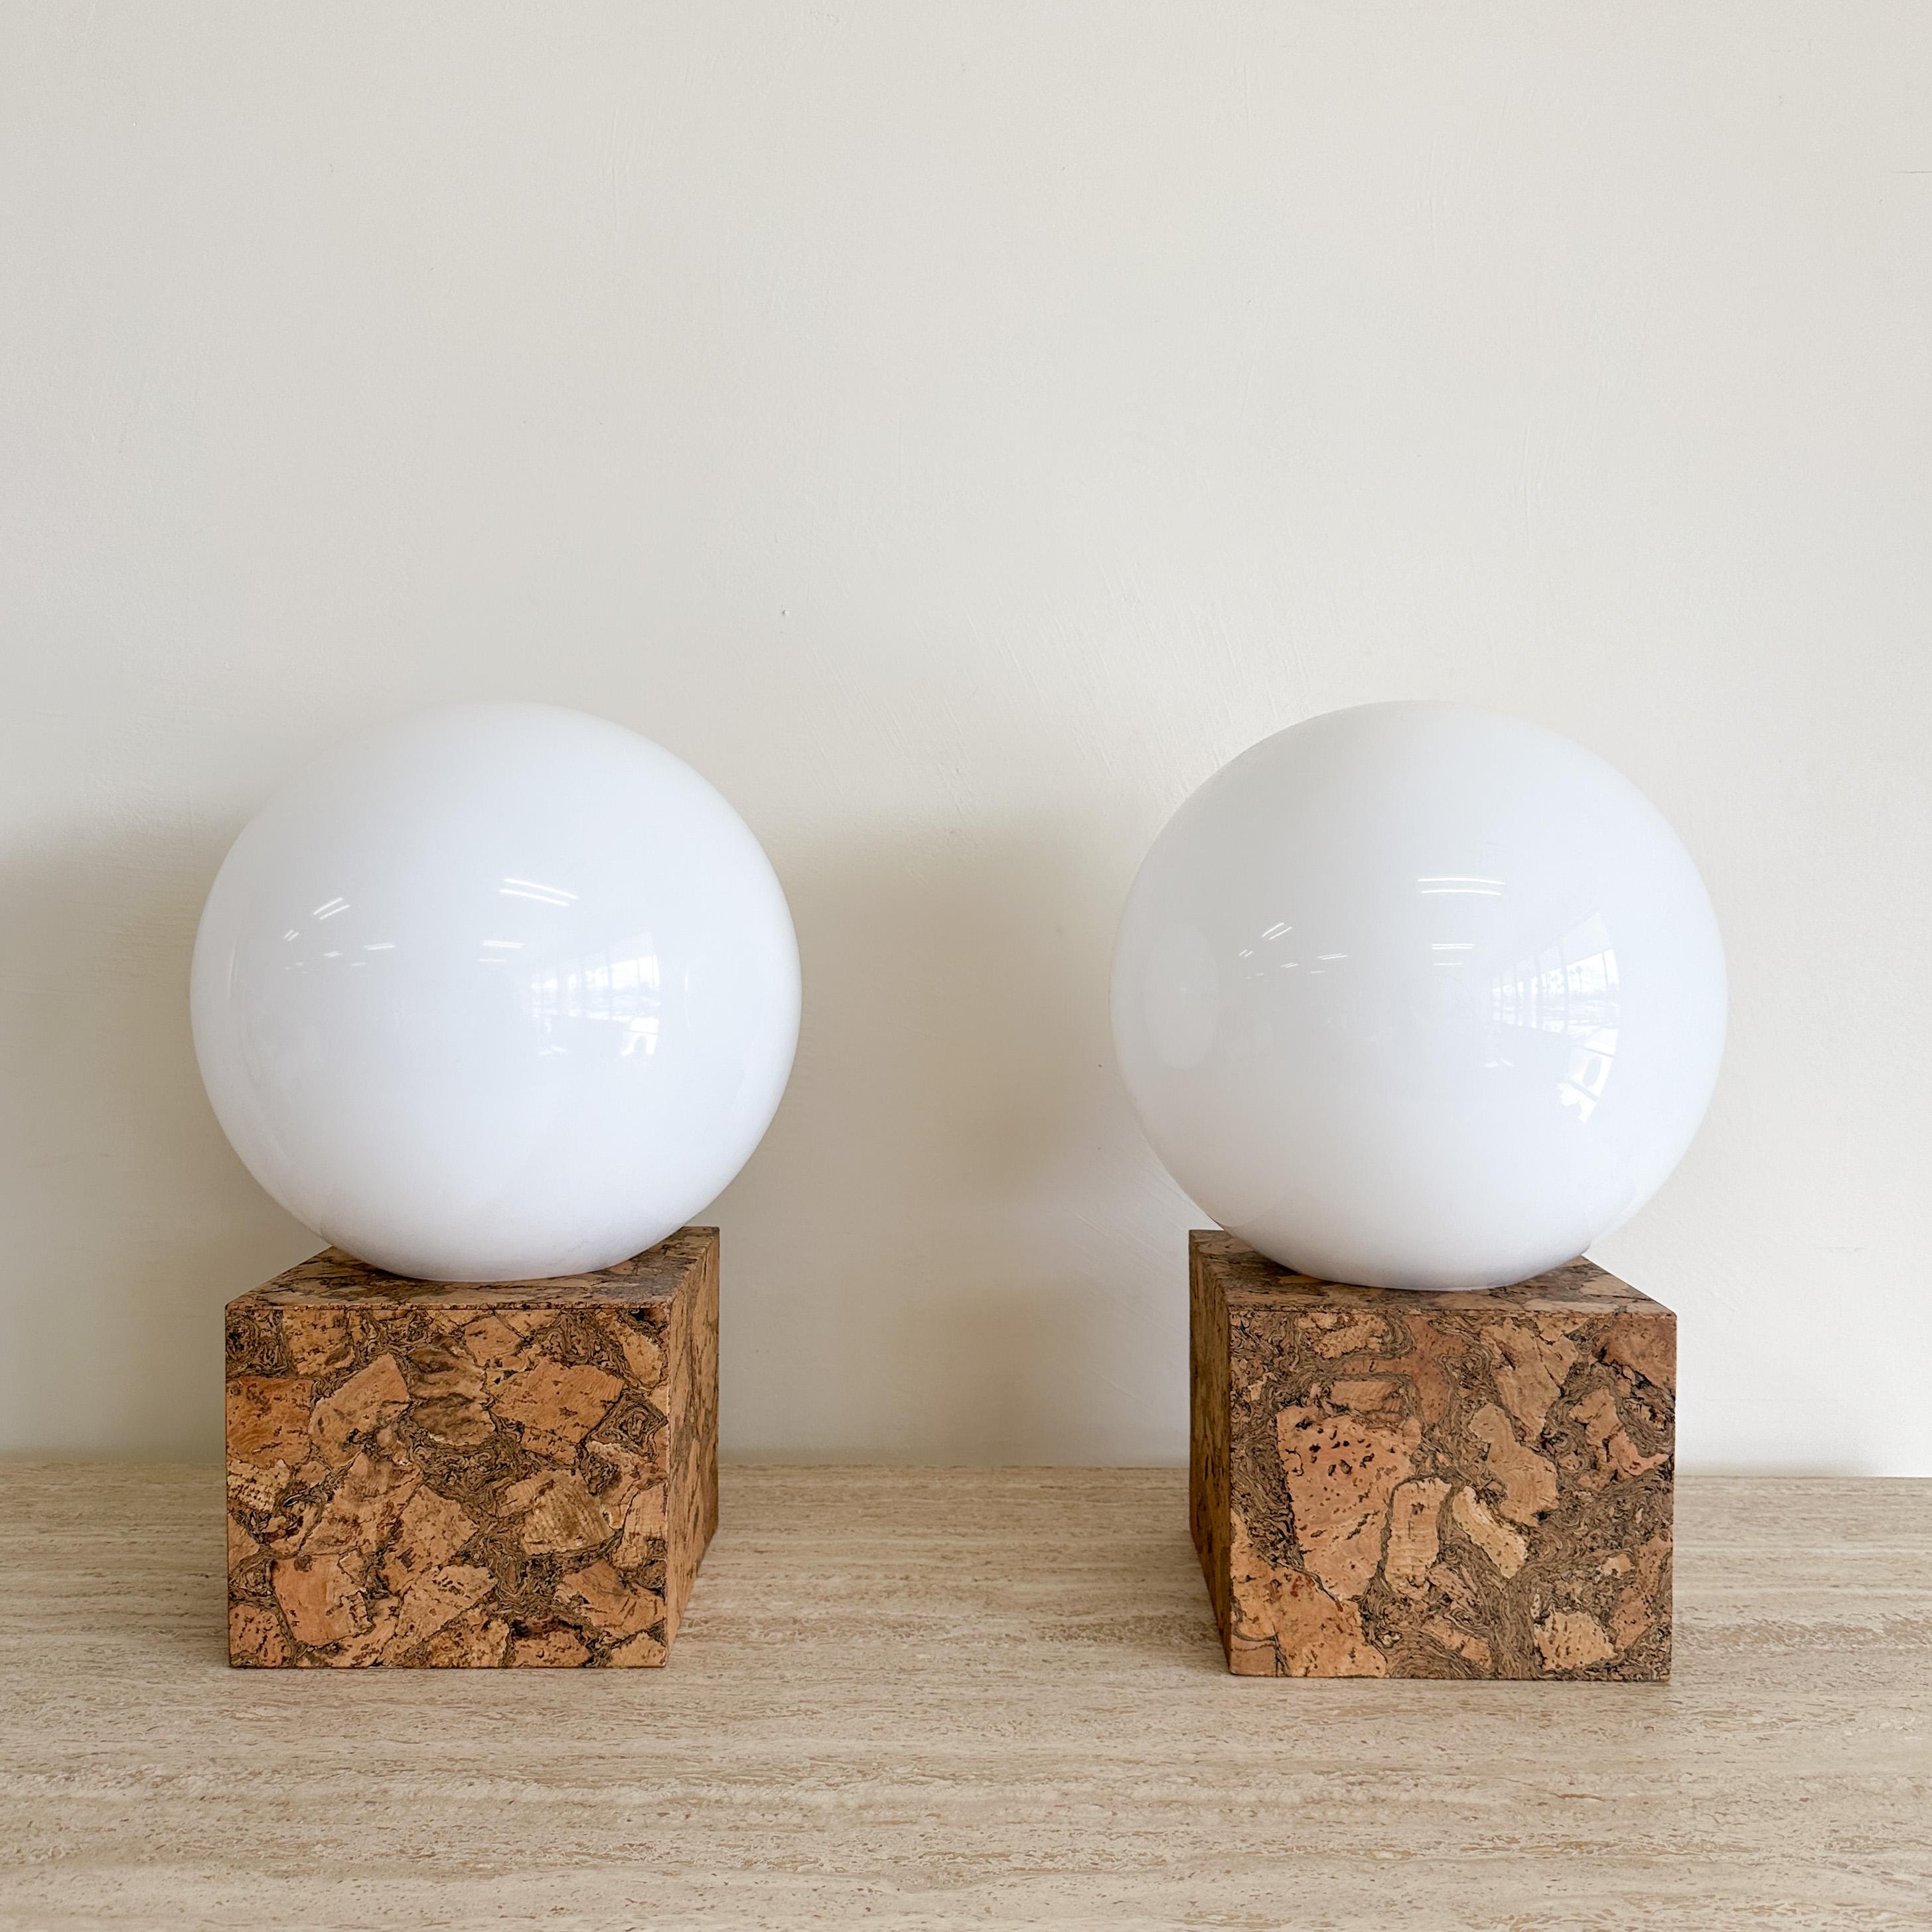 Pair of Cork & Acrylic Globe Lamps.

The lamps are newly made and are a limited addition to our new collection. They are made with porcelain sockets and twisted rayon-covered lamp wire. The switch is on the cord for easy access. The lampshade is